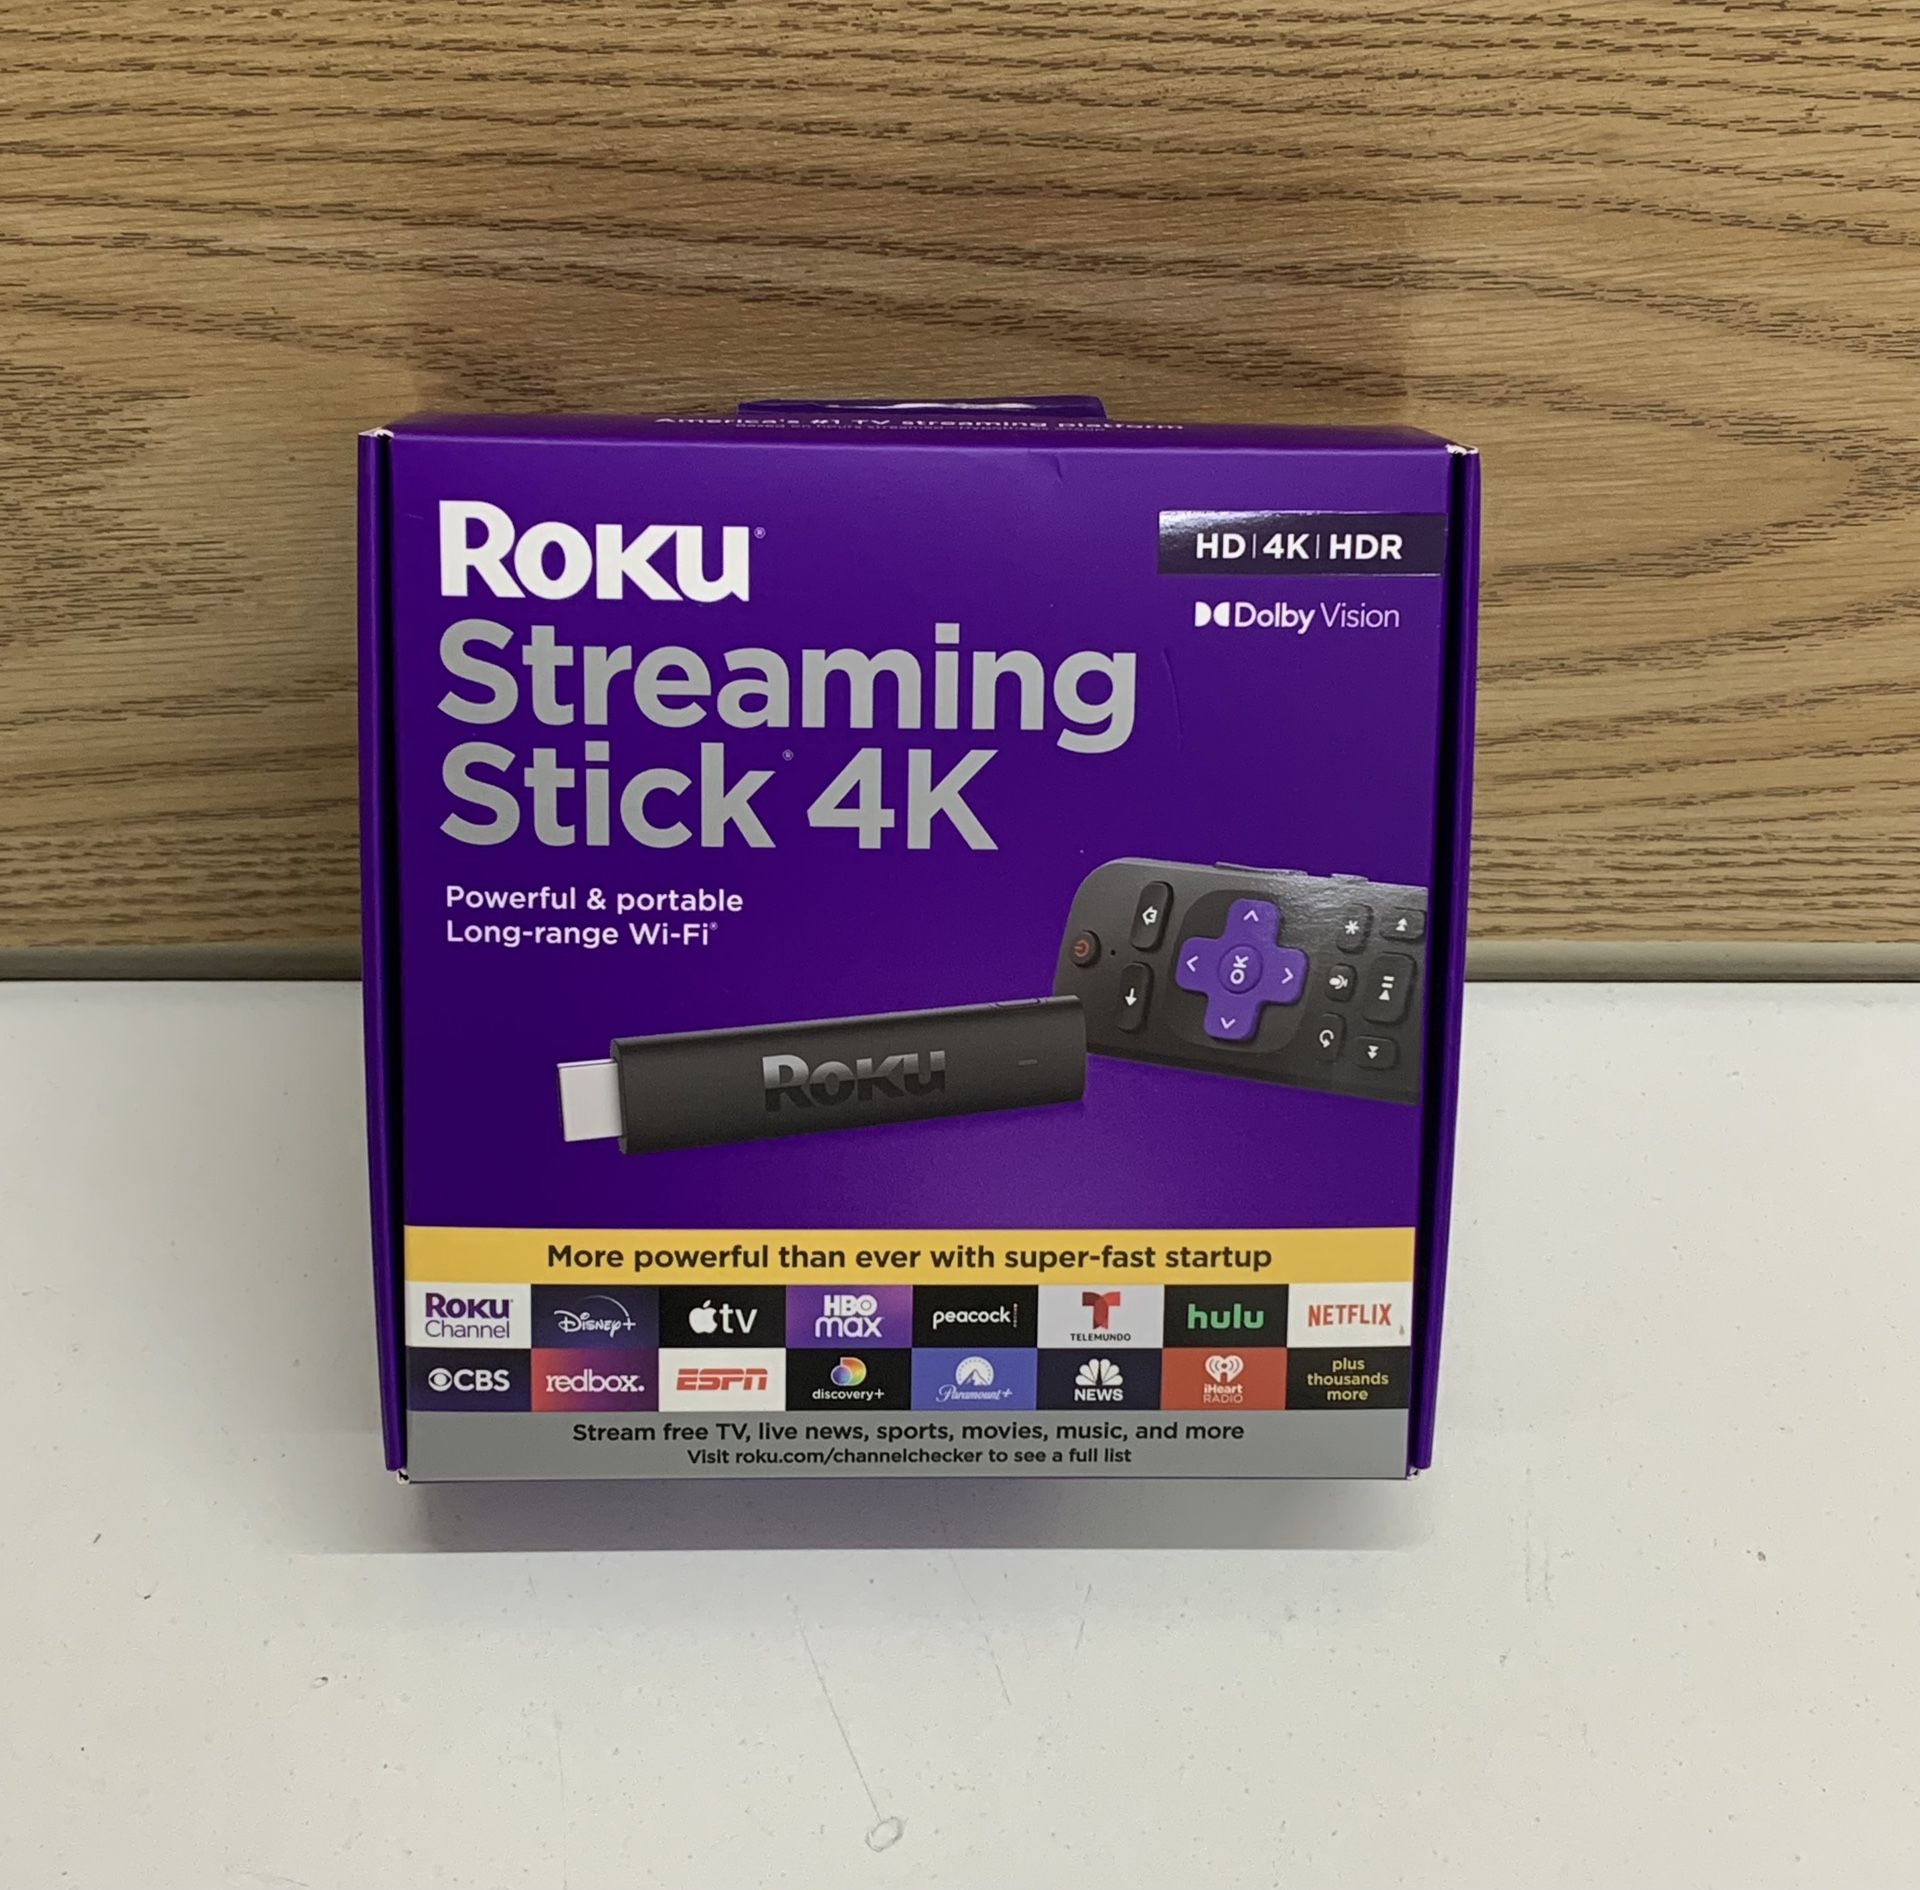 Roku Streaming Stick 4K/HDR/Dolby Roku Voice Remote and TV Controls